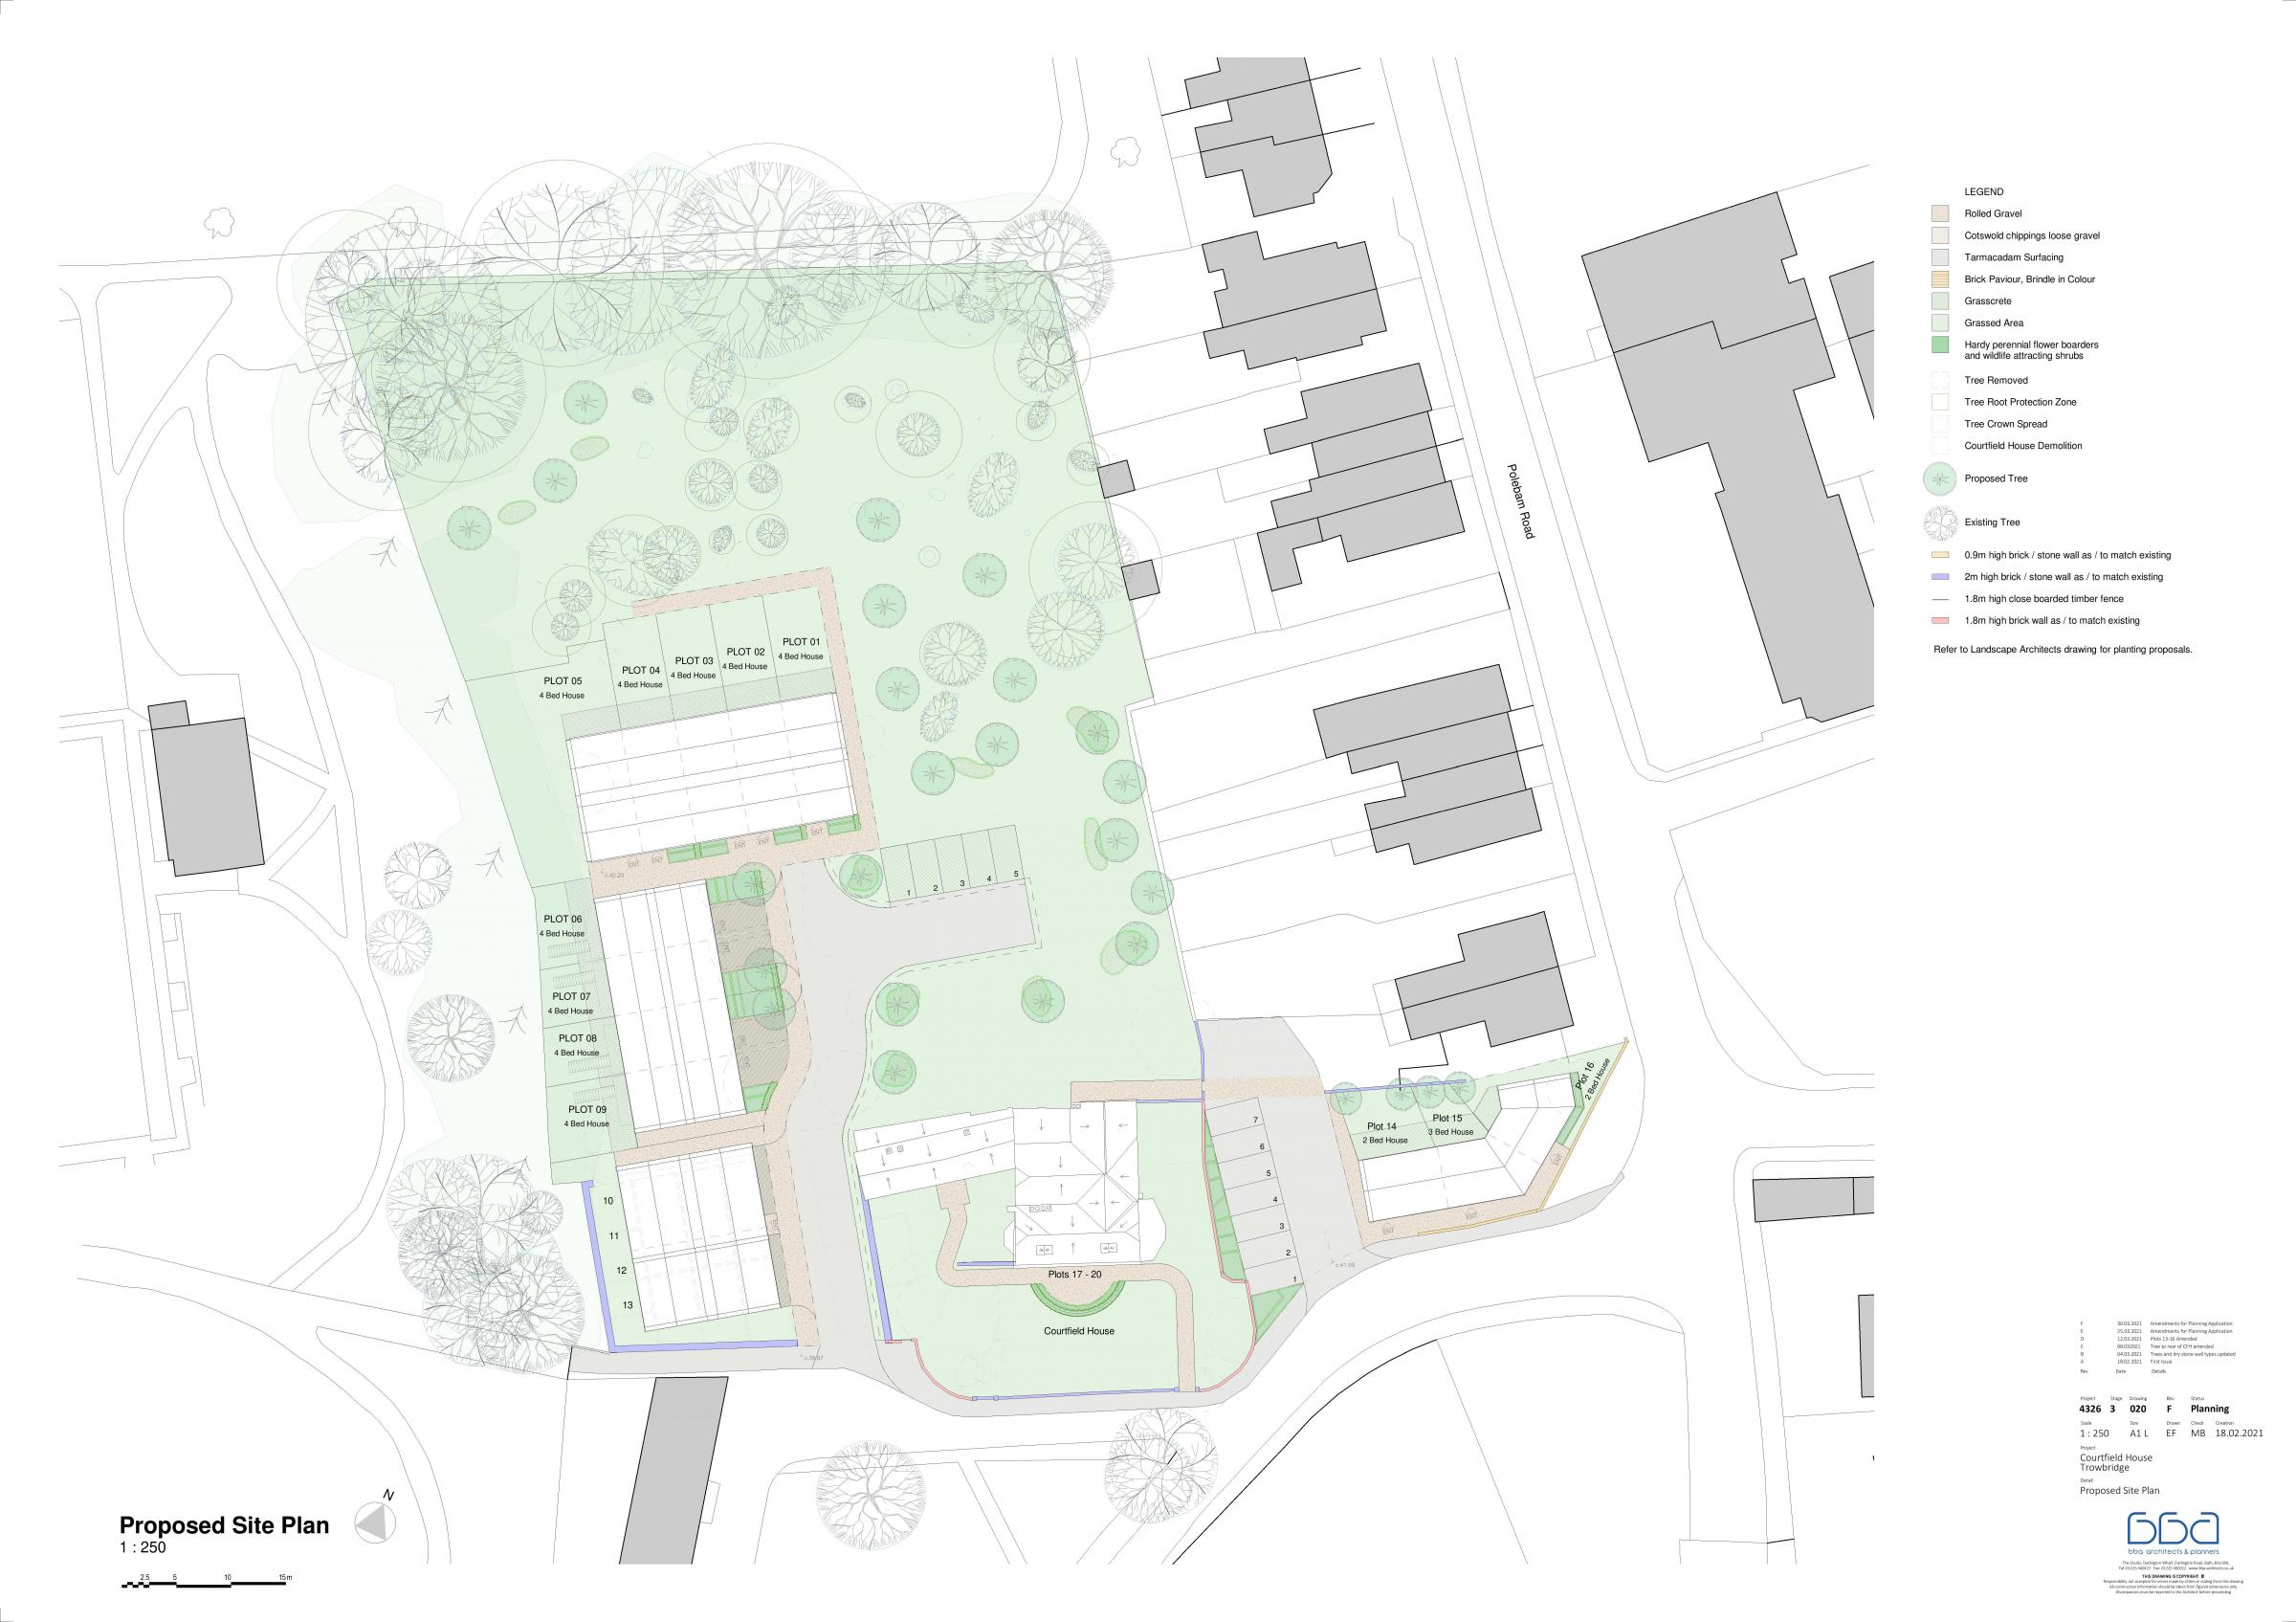 Proposed site plan for Courtfield House